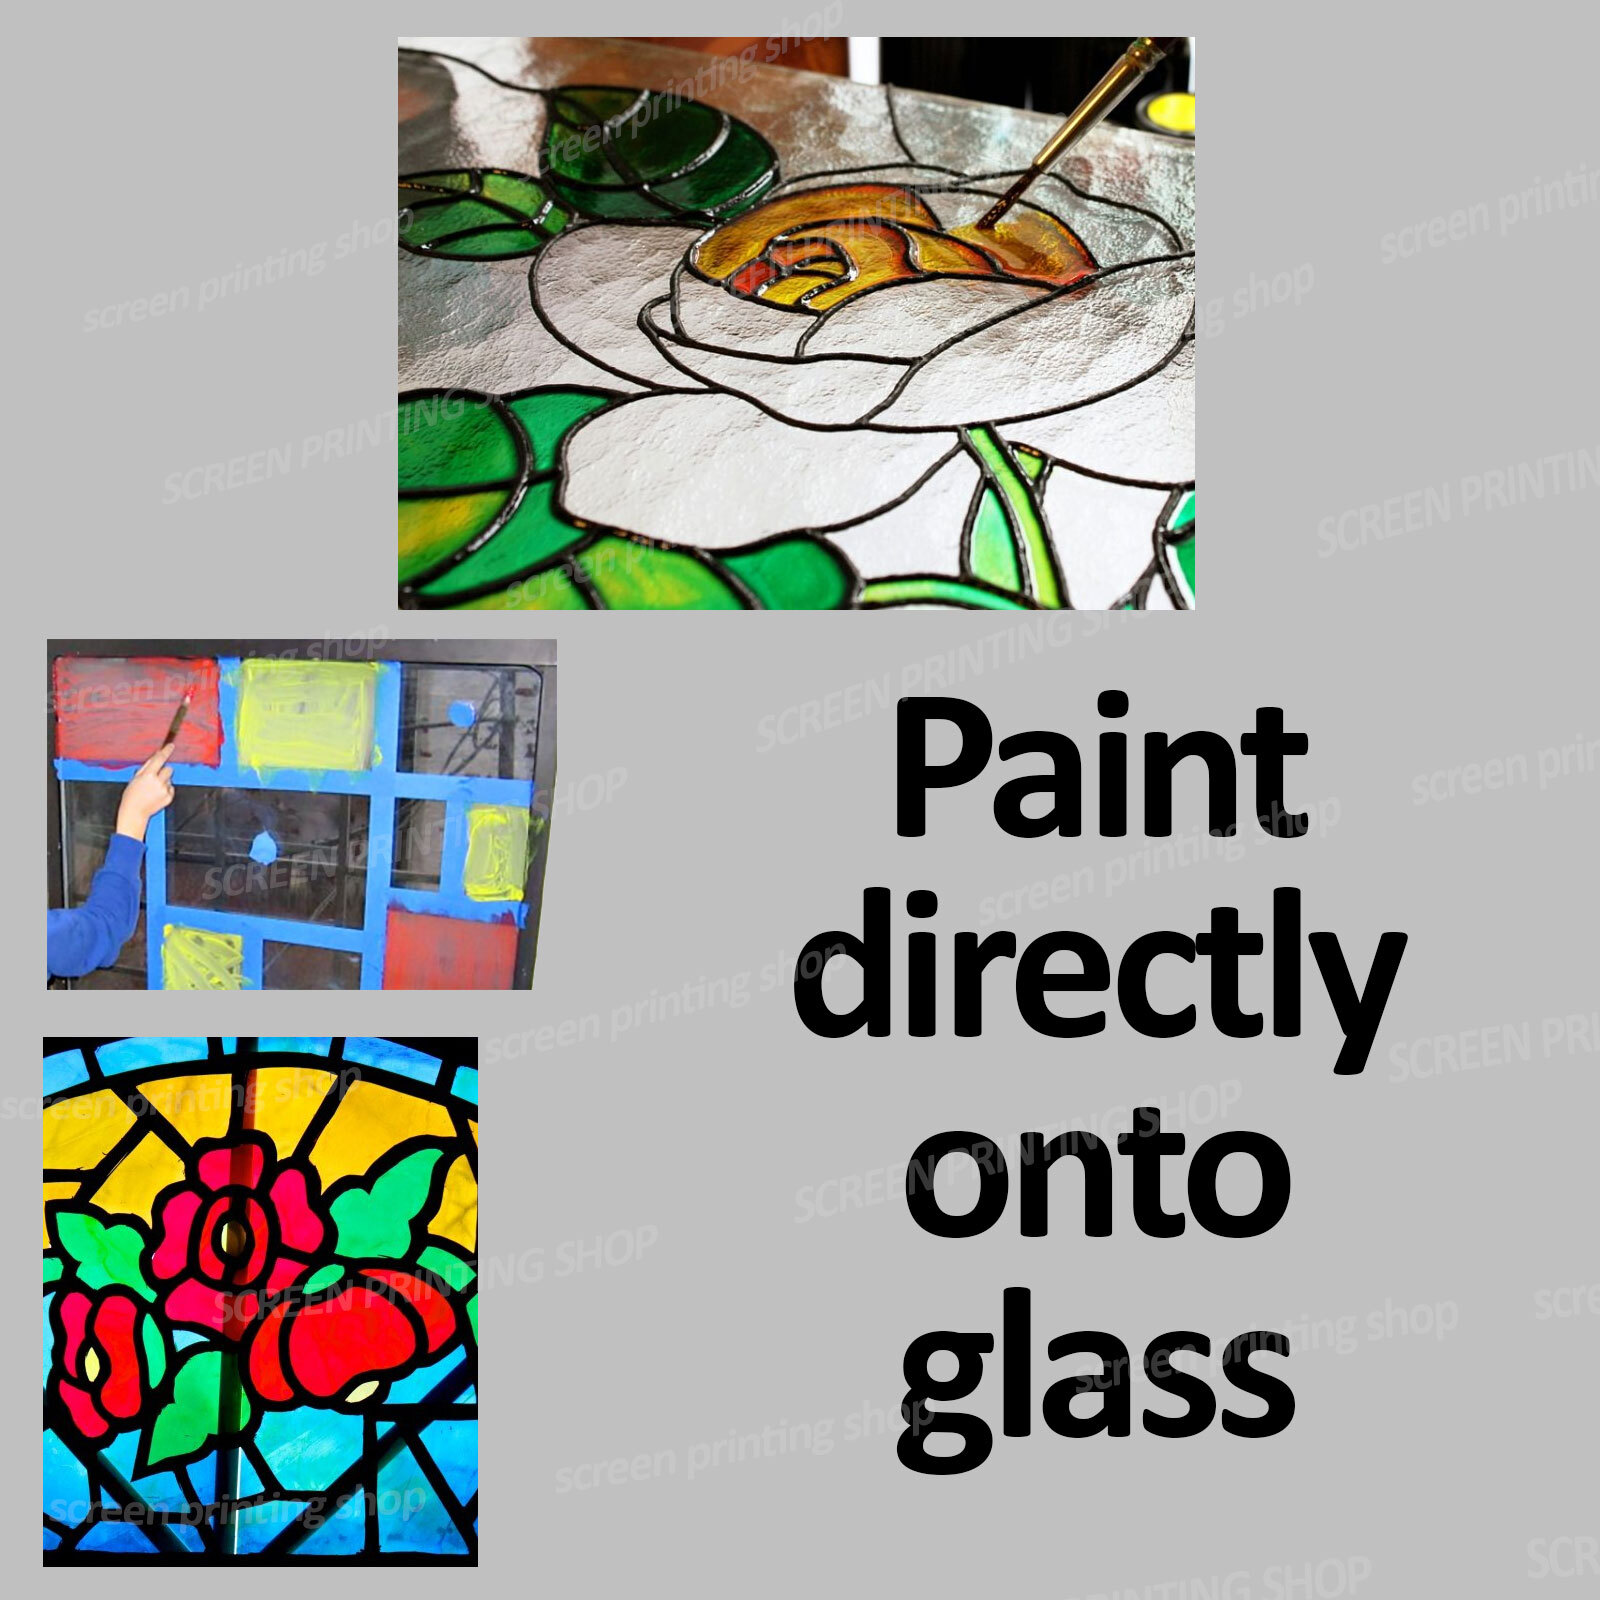 dishwasher safe child friendly Red Stained Glass Paint easy use oven cure 